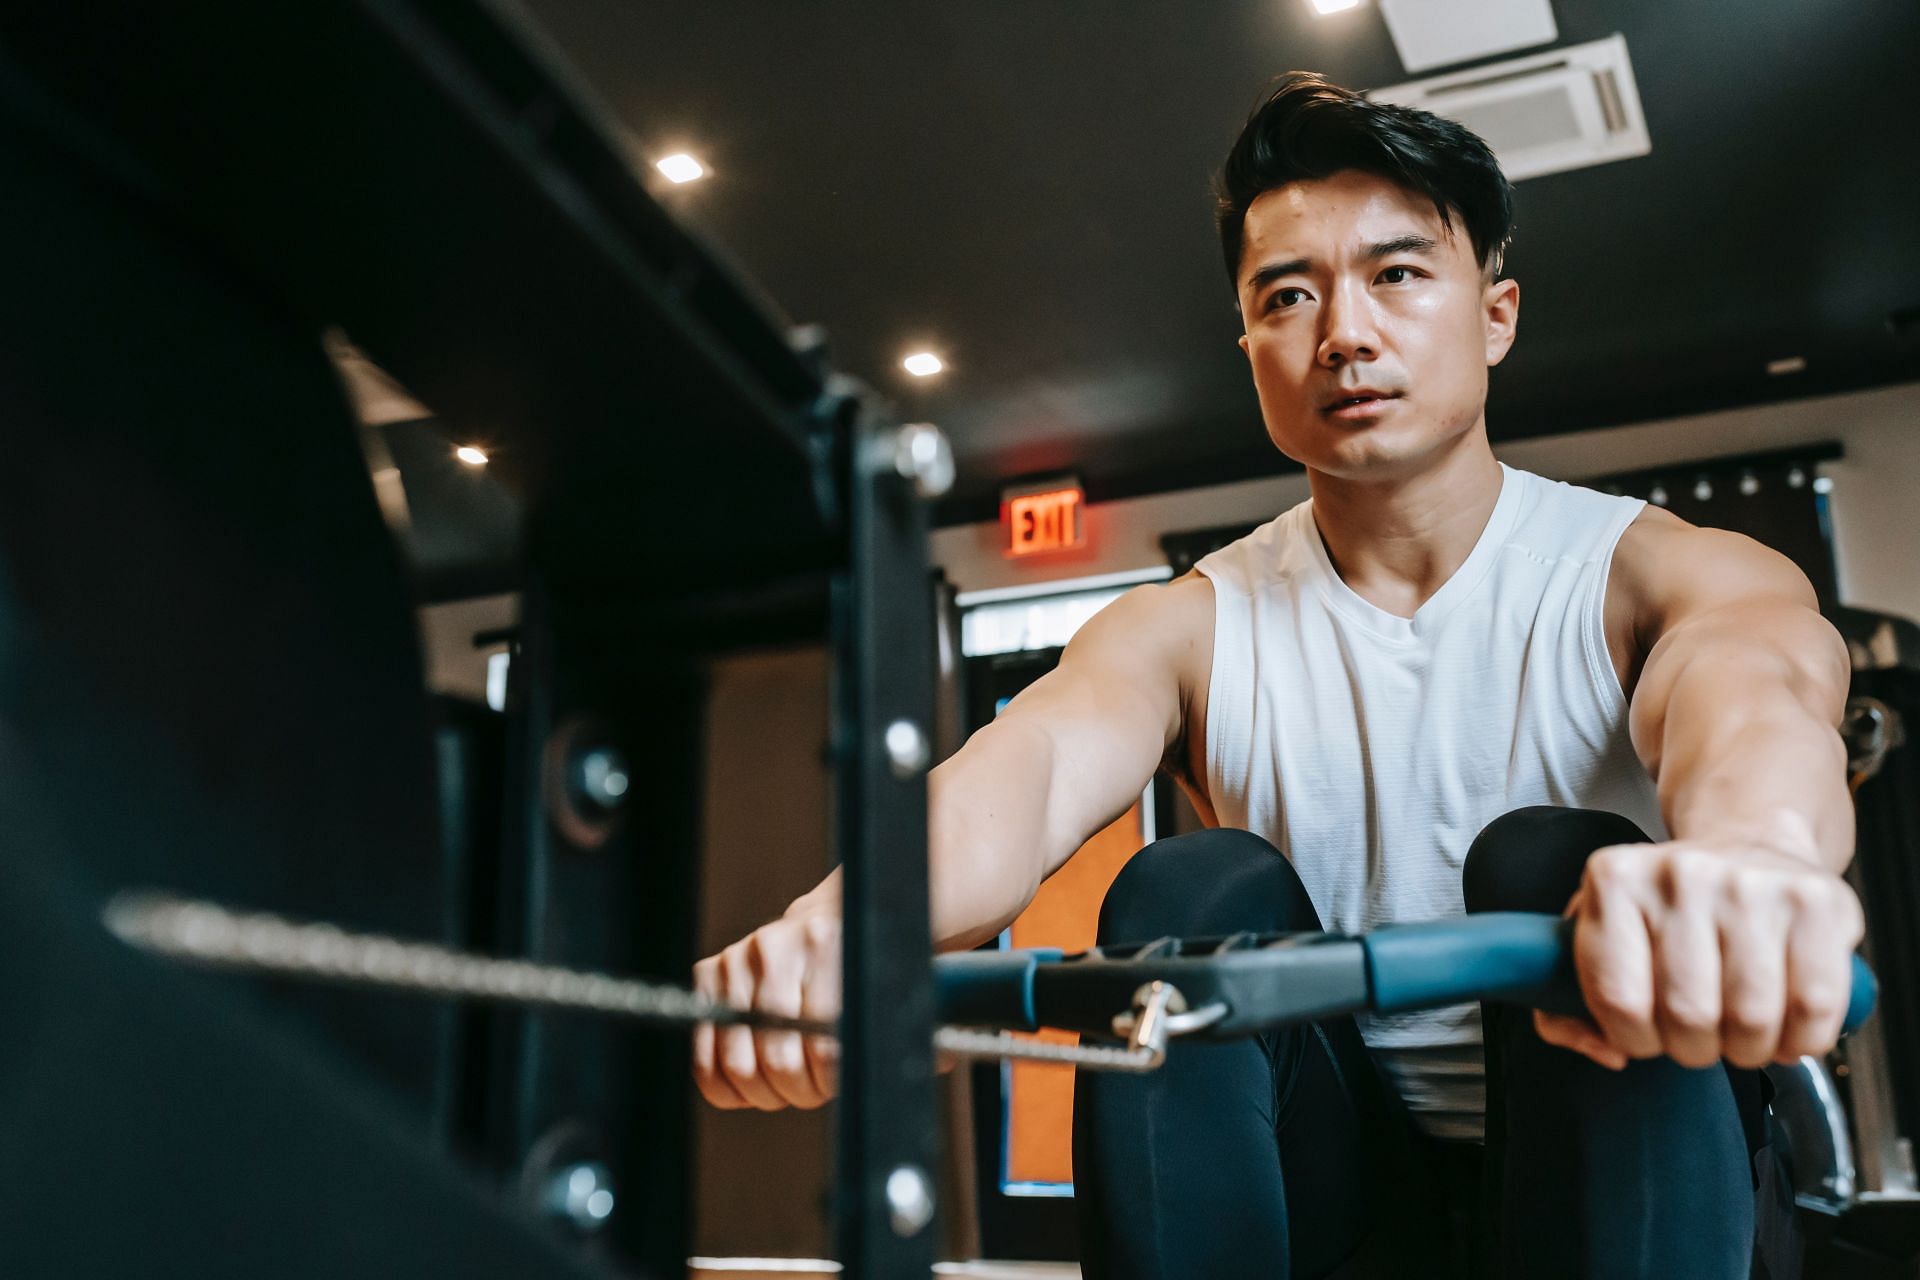 Get a full-body workout by using a rowing machine. (Image by Andres Ayrton / Pexels)